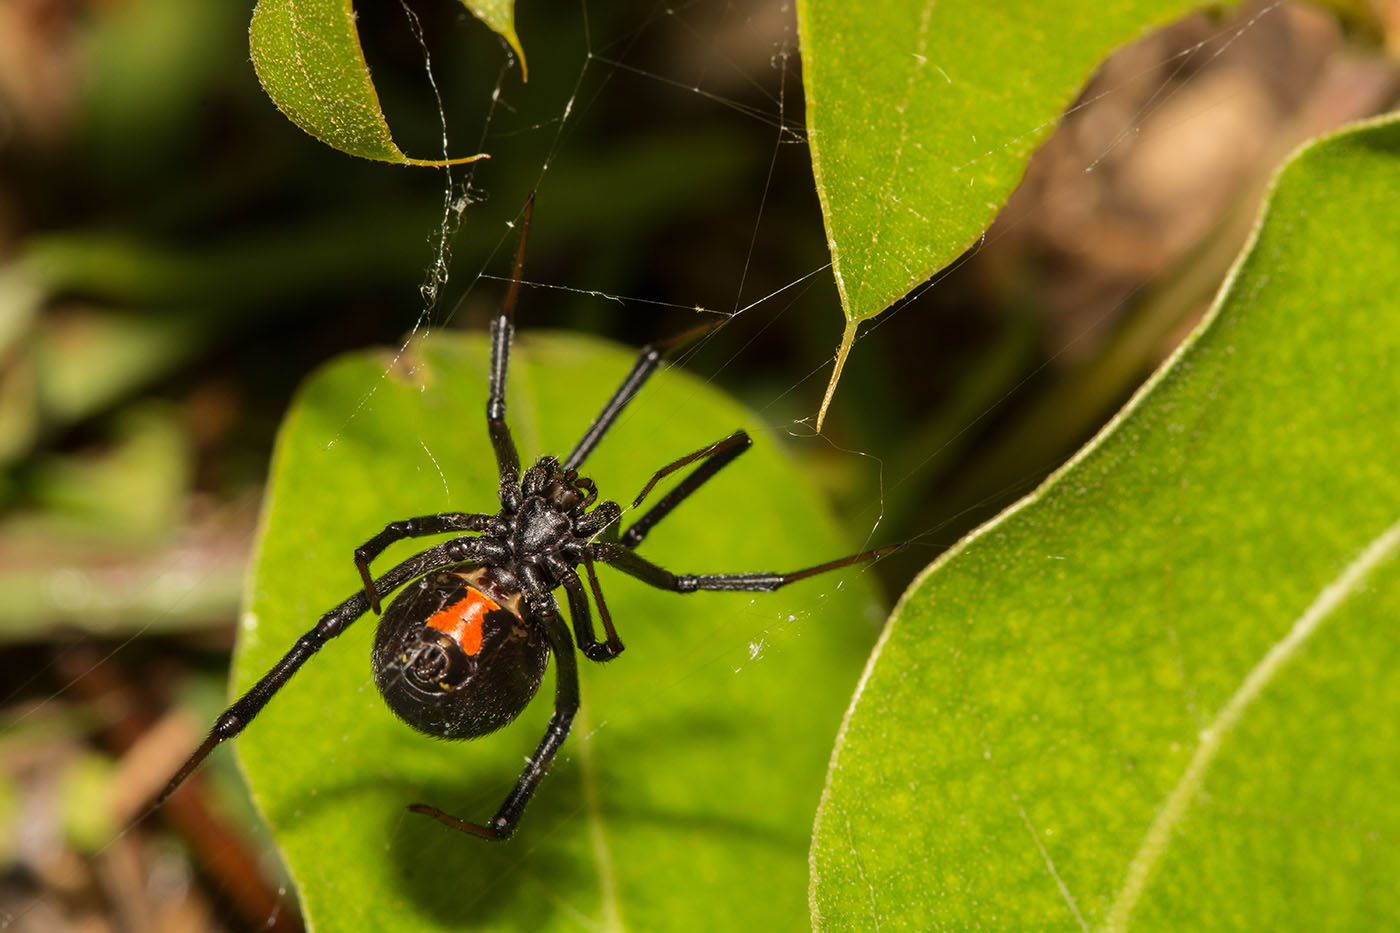 A black widow spider - are you in need of spider pest control? Contact GGA Pest Management today!